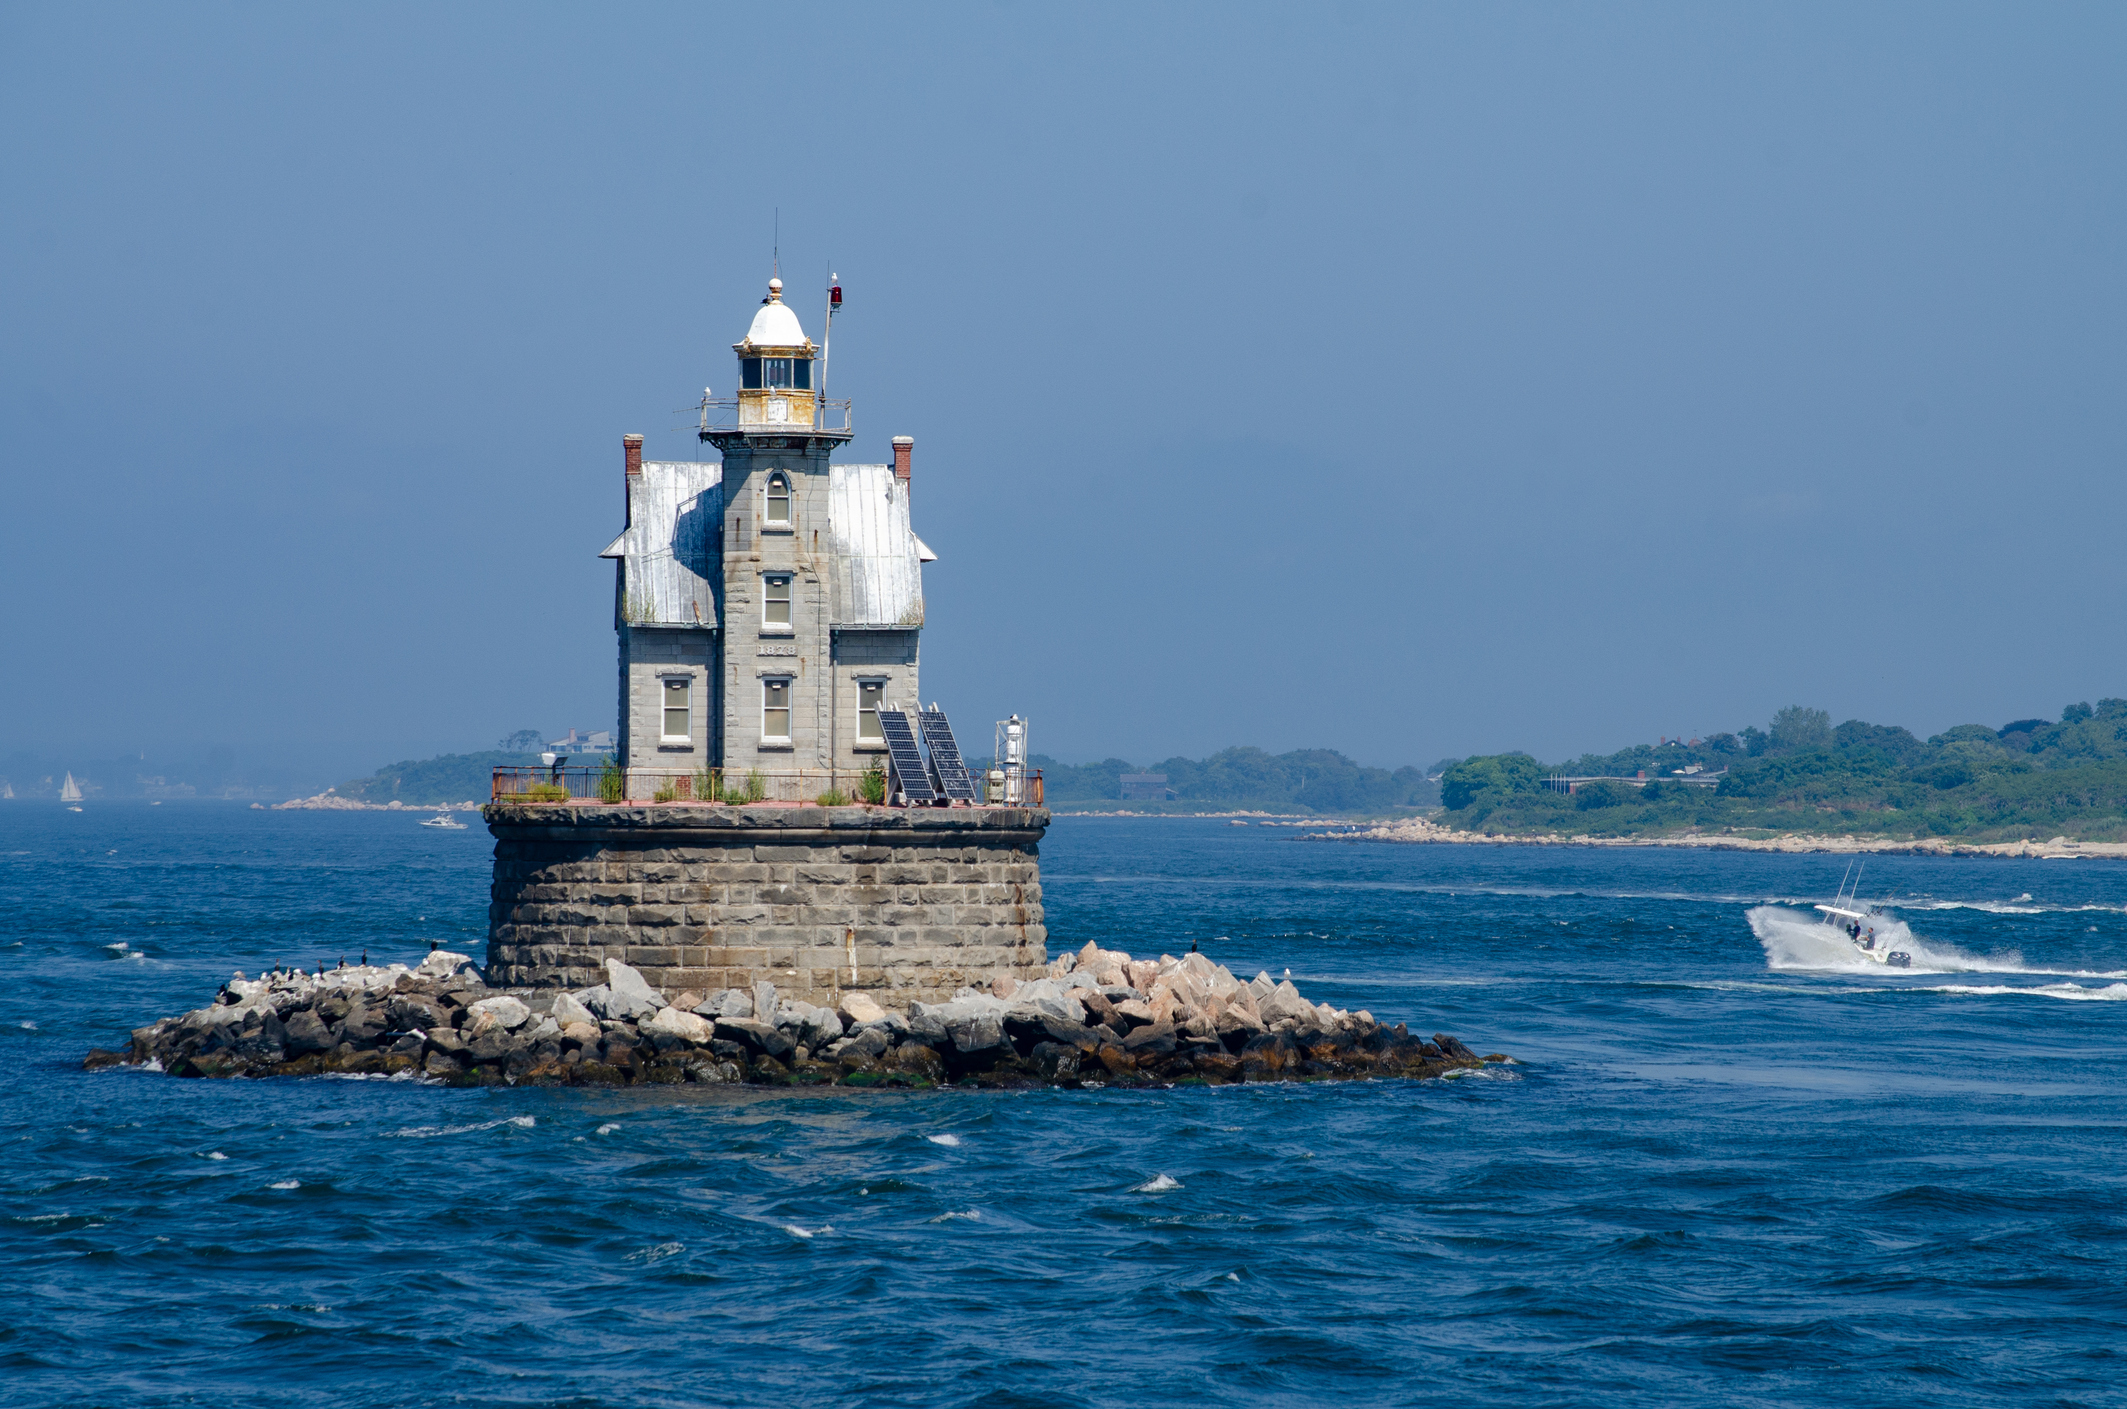 Race Rock Light is a lighthouse on Race Rock Reef, a dangerous set of rocks on Long Island Sound southwest of Fishers Island, New York and the site of many shipwrecks.